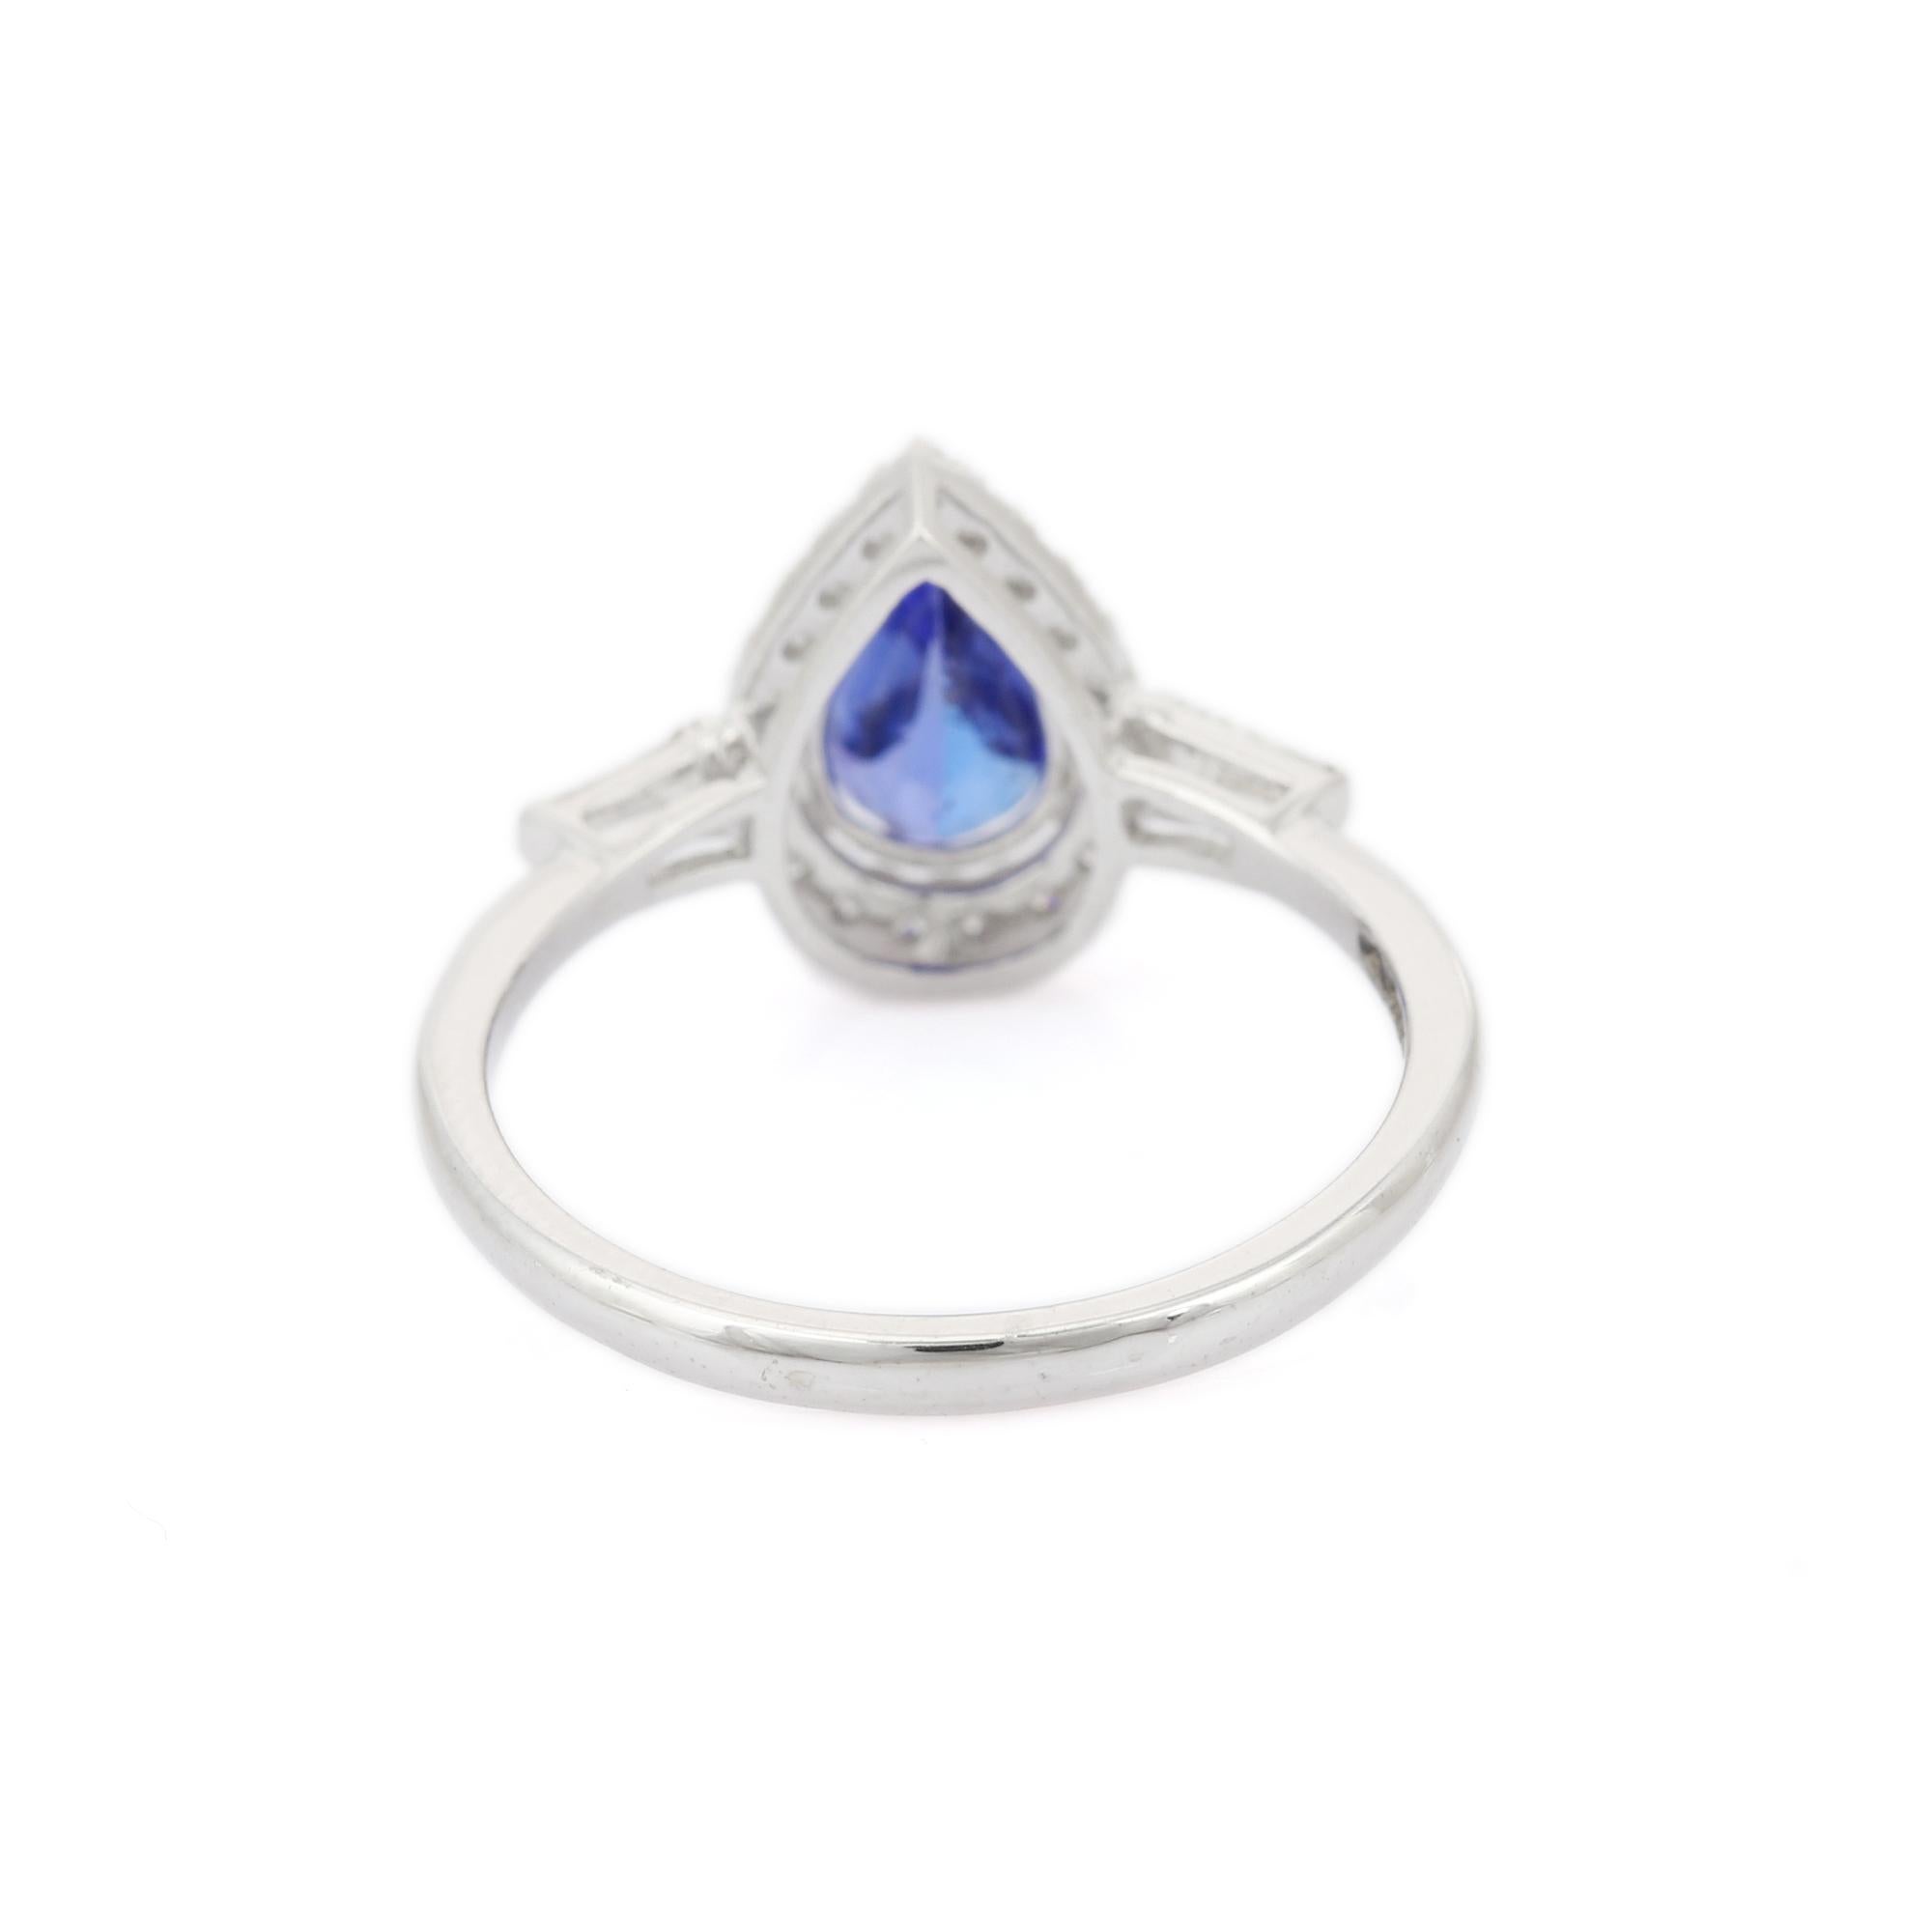 For Sale:  1.1 CTW Pear Shaped Tanzanite and Diamond Ring in 18k Solid White Gold 3